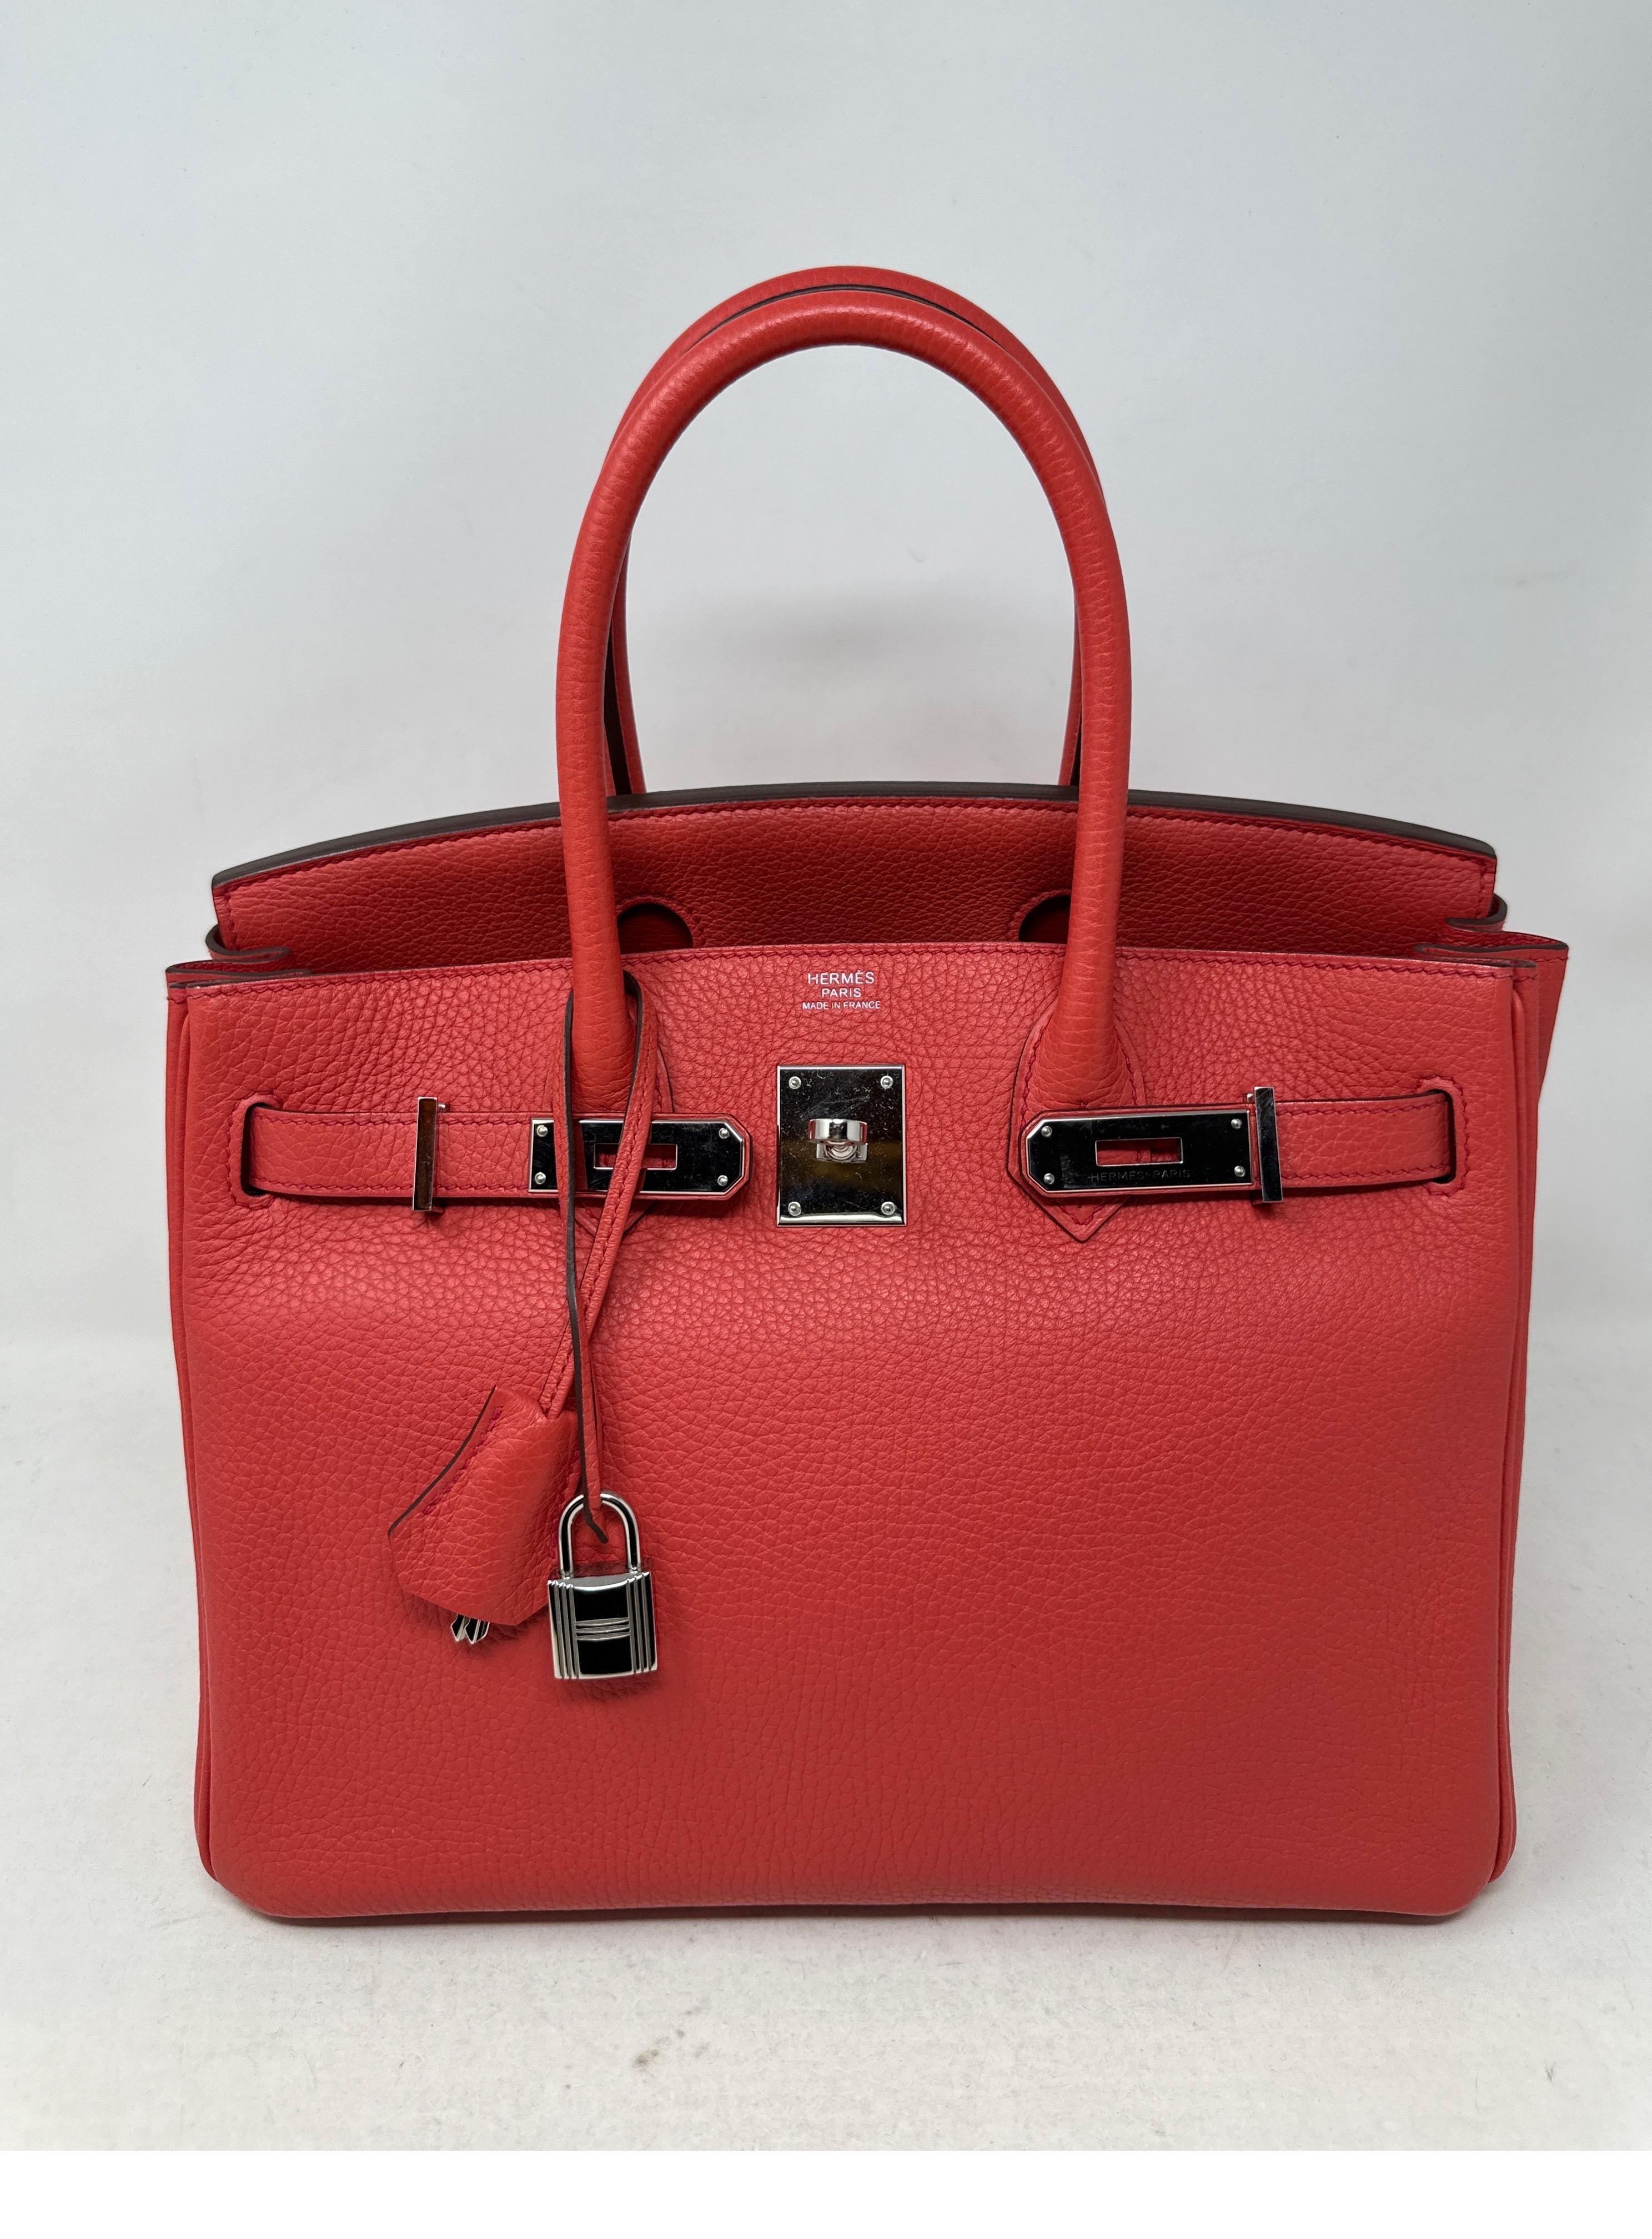 Hermes Bouganvillea Birkin 30 Bag. Stunning rosy red pink bag. Excellent like new condition. Palladium hardware. Color pops. Most wanted size. Includes clochette, lock, keys, and dust bag. Guaranteed authentic. 